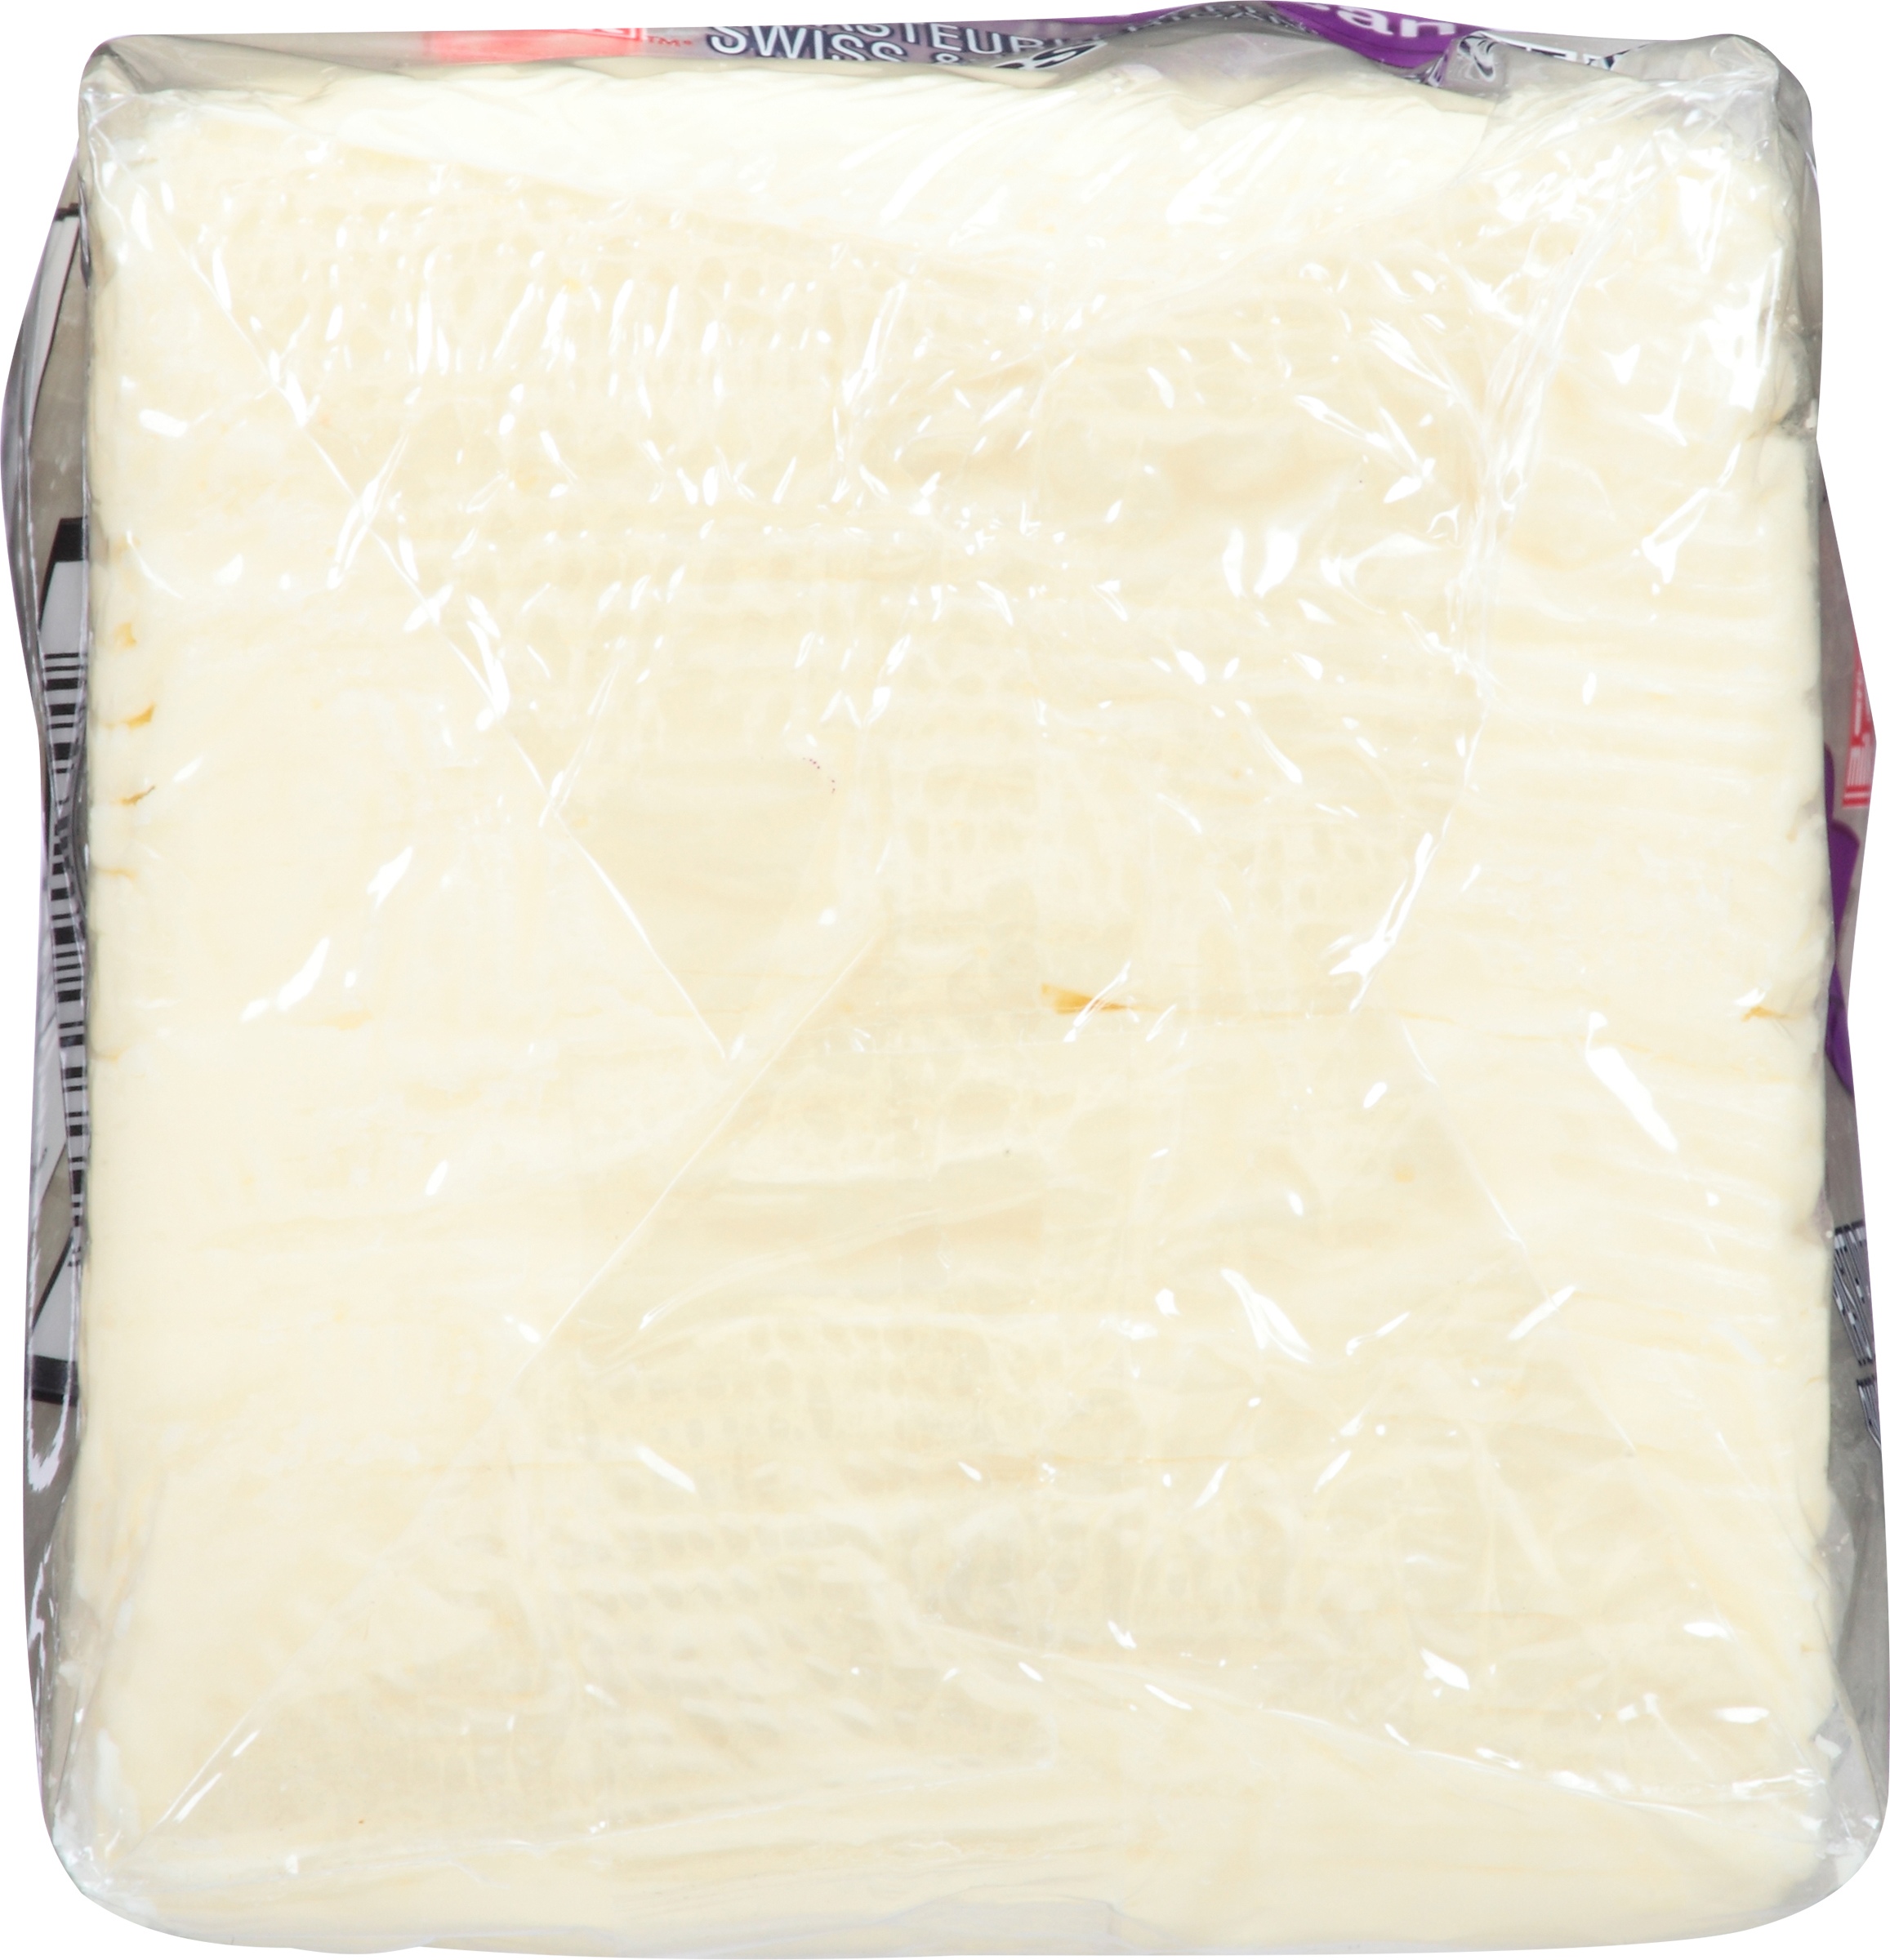 American Heritage Swiss/American Cheese, 5 Lbs., 120 Count - image 5 of 11